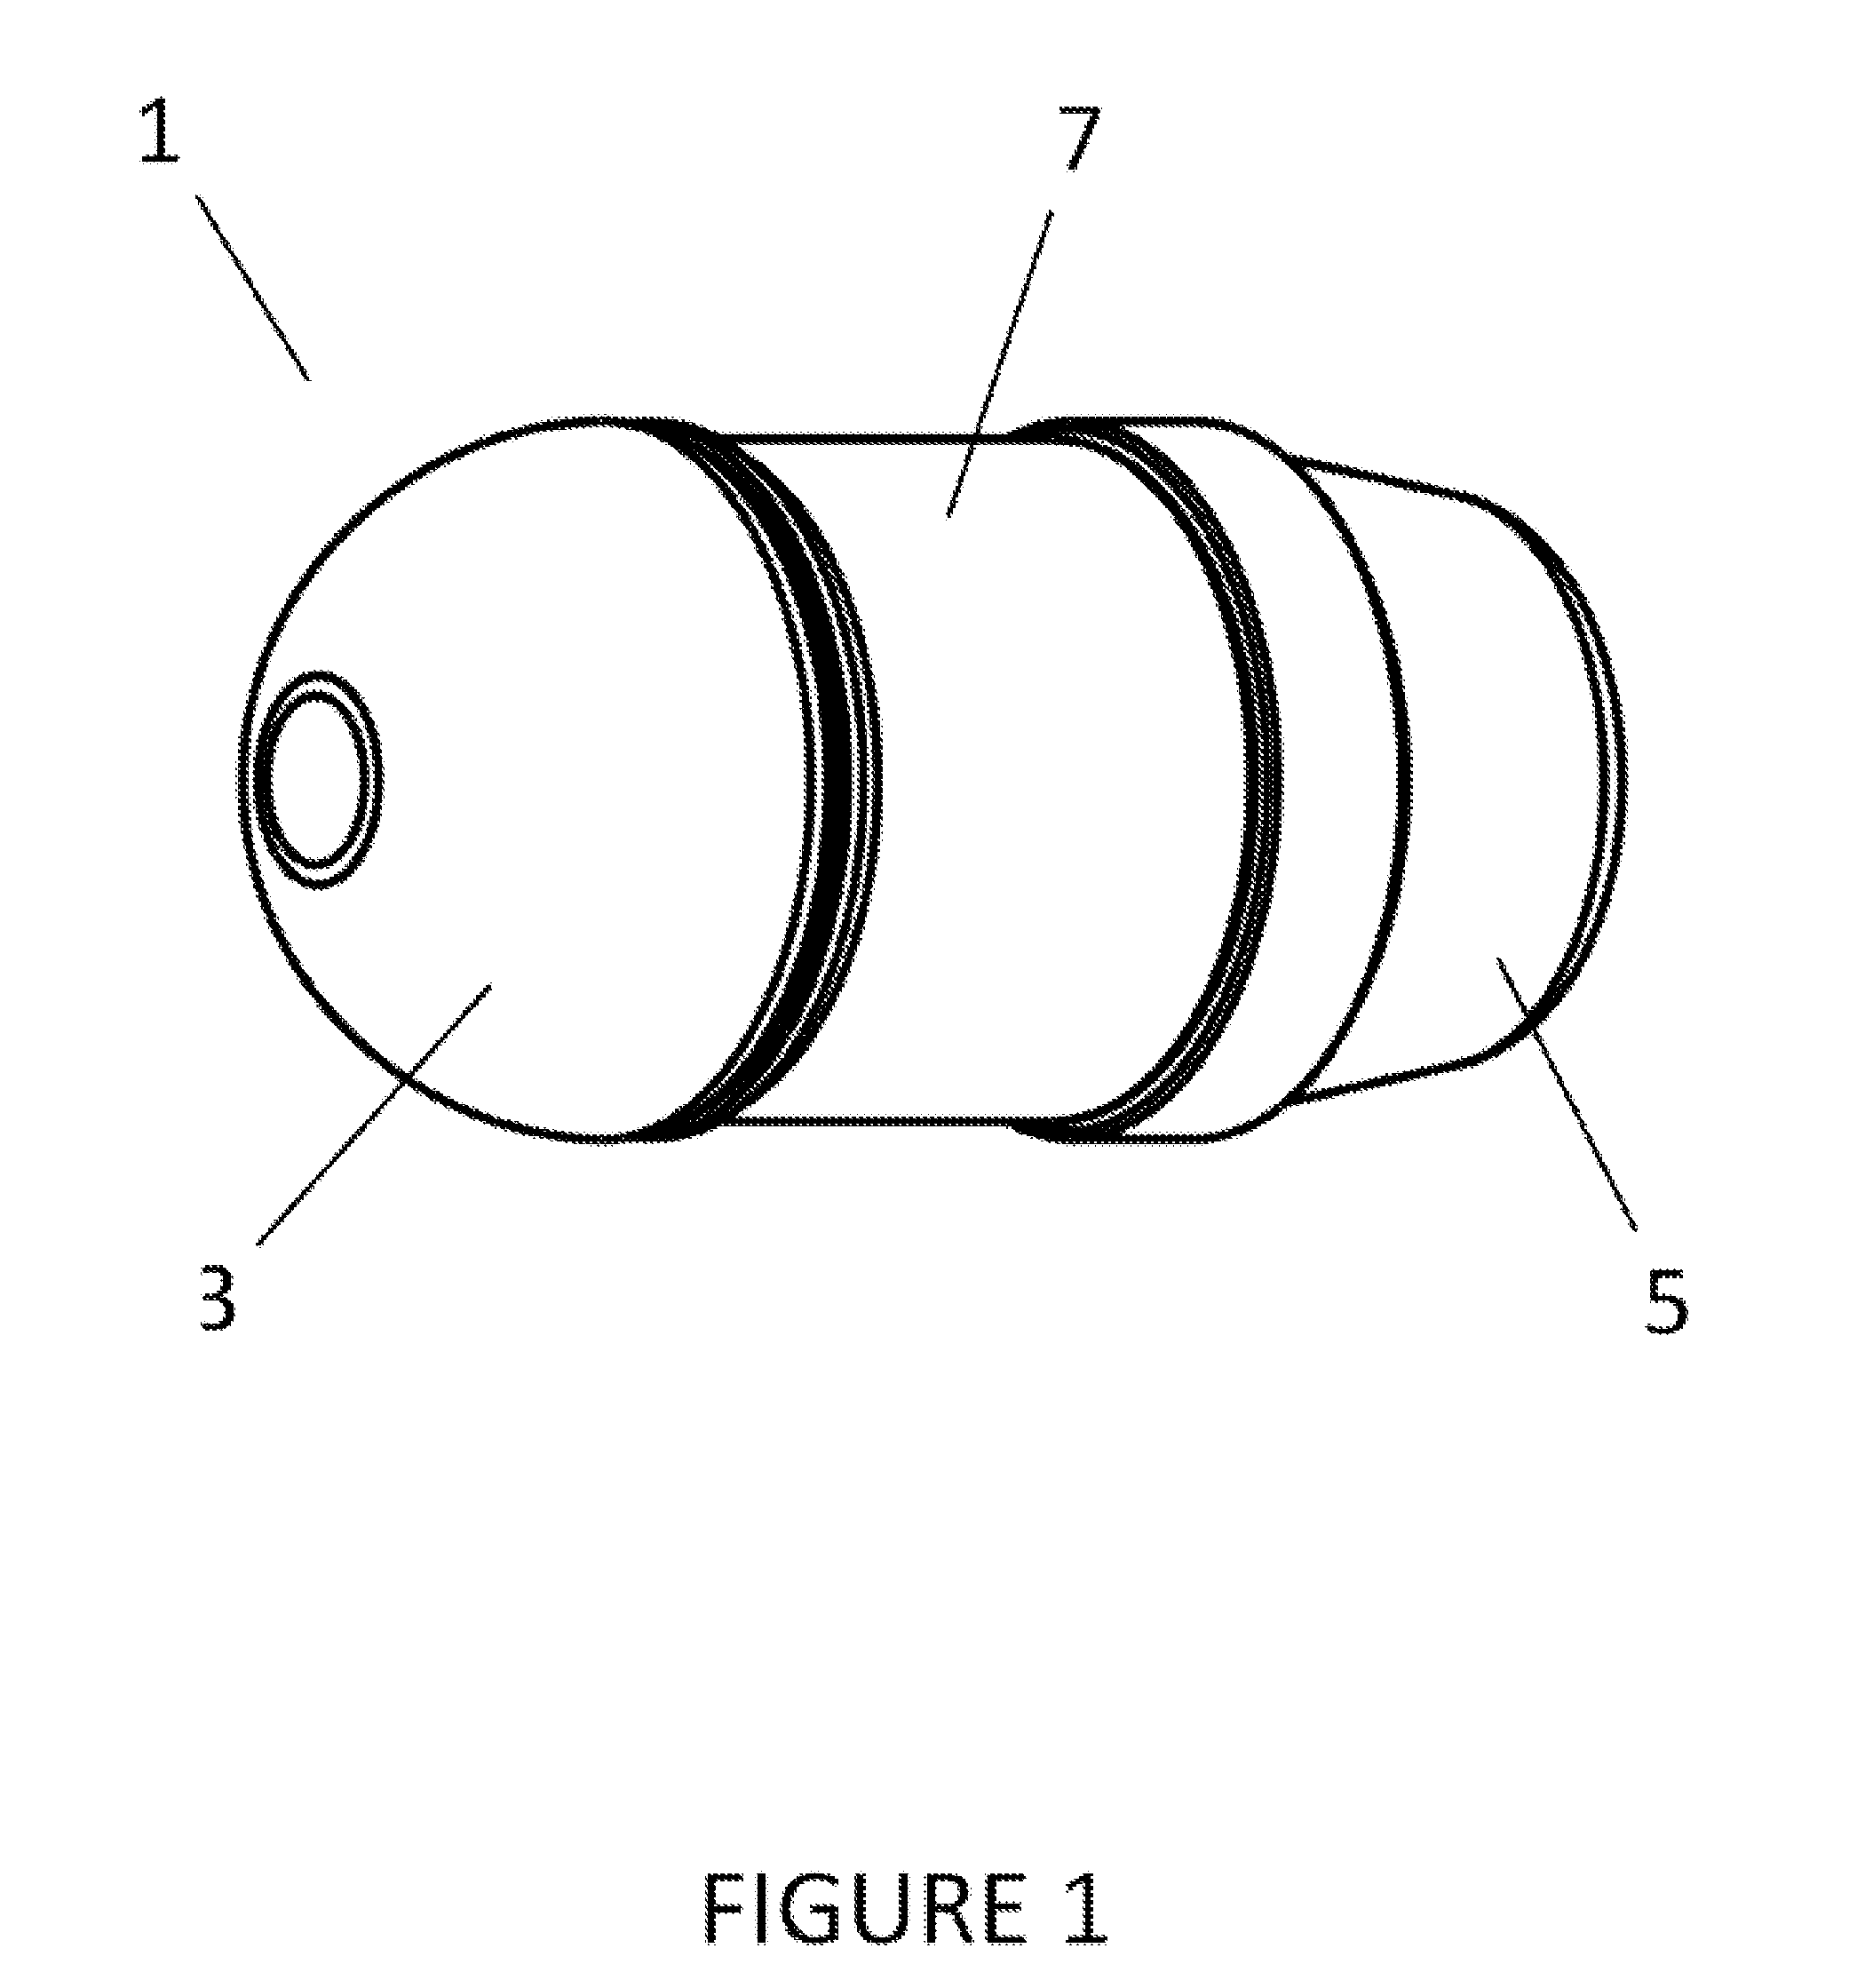 Spin Stabilized And/ Or Drag Stabilized, Blunt Impact Non-Lethal Projectile